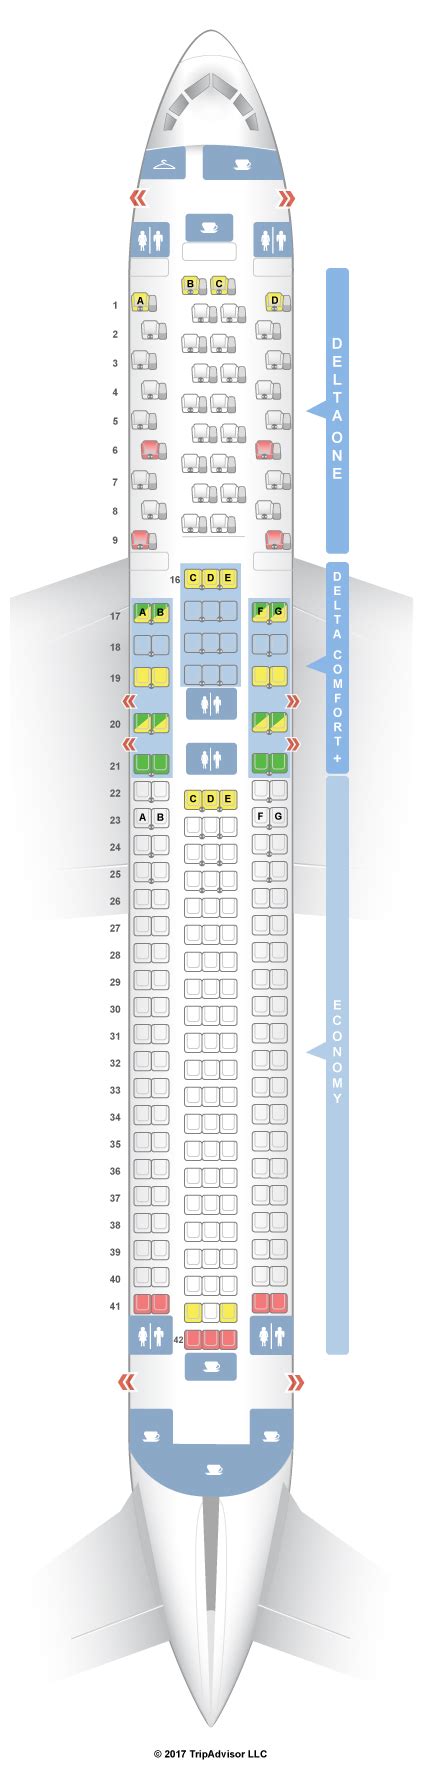 Delta seatguru 767-300. Boeing 767-300ER (76Z) Layout 4. Note: There are 4 versions of this aircraft. For your next Delta flight, use this seating chart to get the most comfortable seats, legroom, and … 